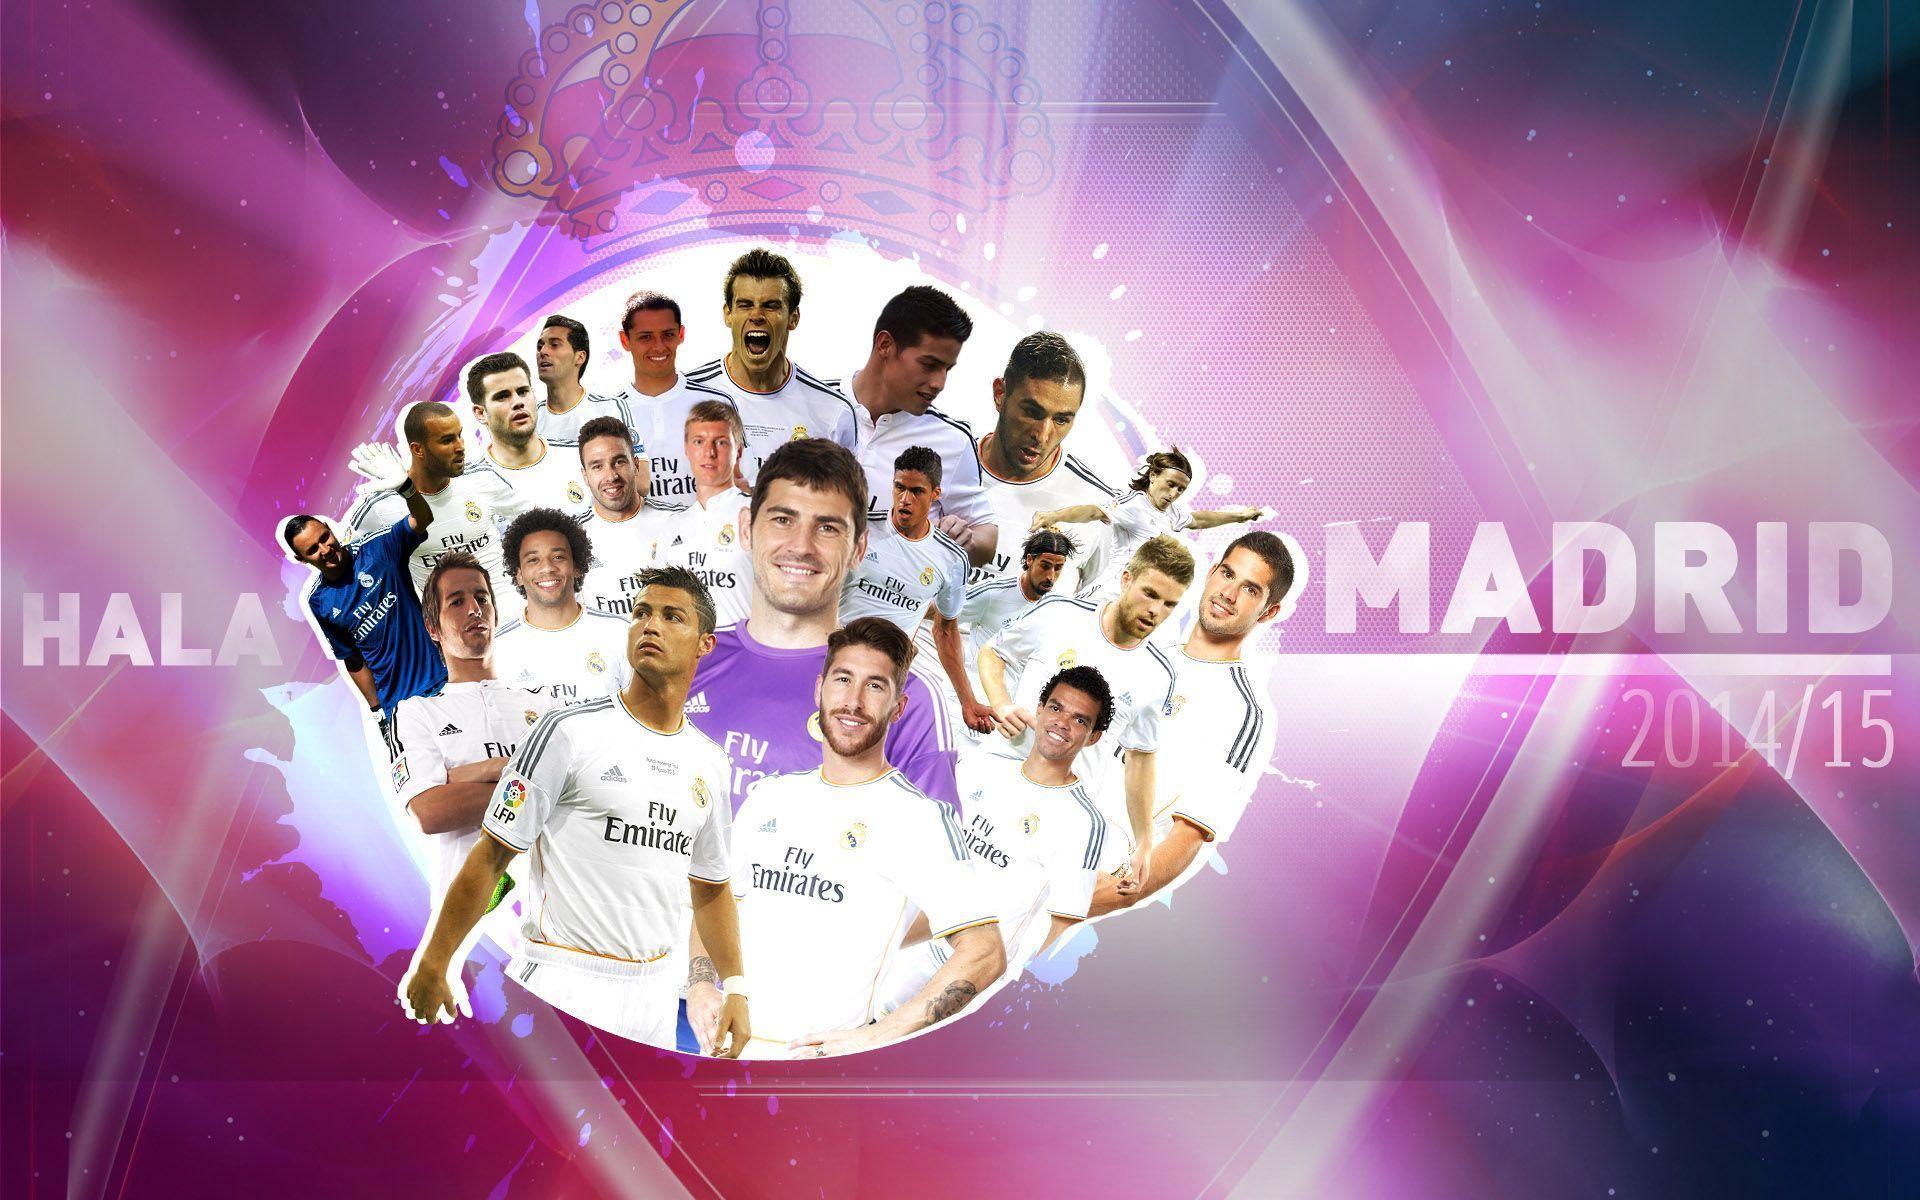 Real Madrid 2015 Football Team Wallpaper Wide or HD. Sports